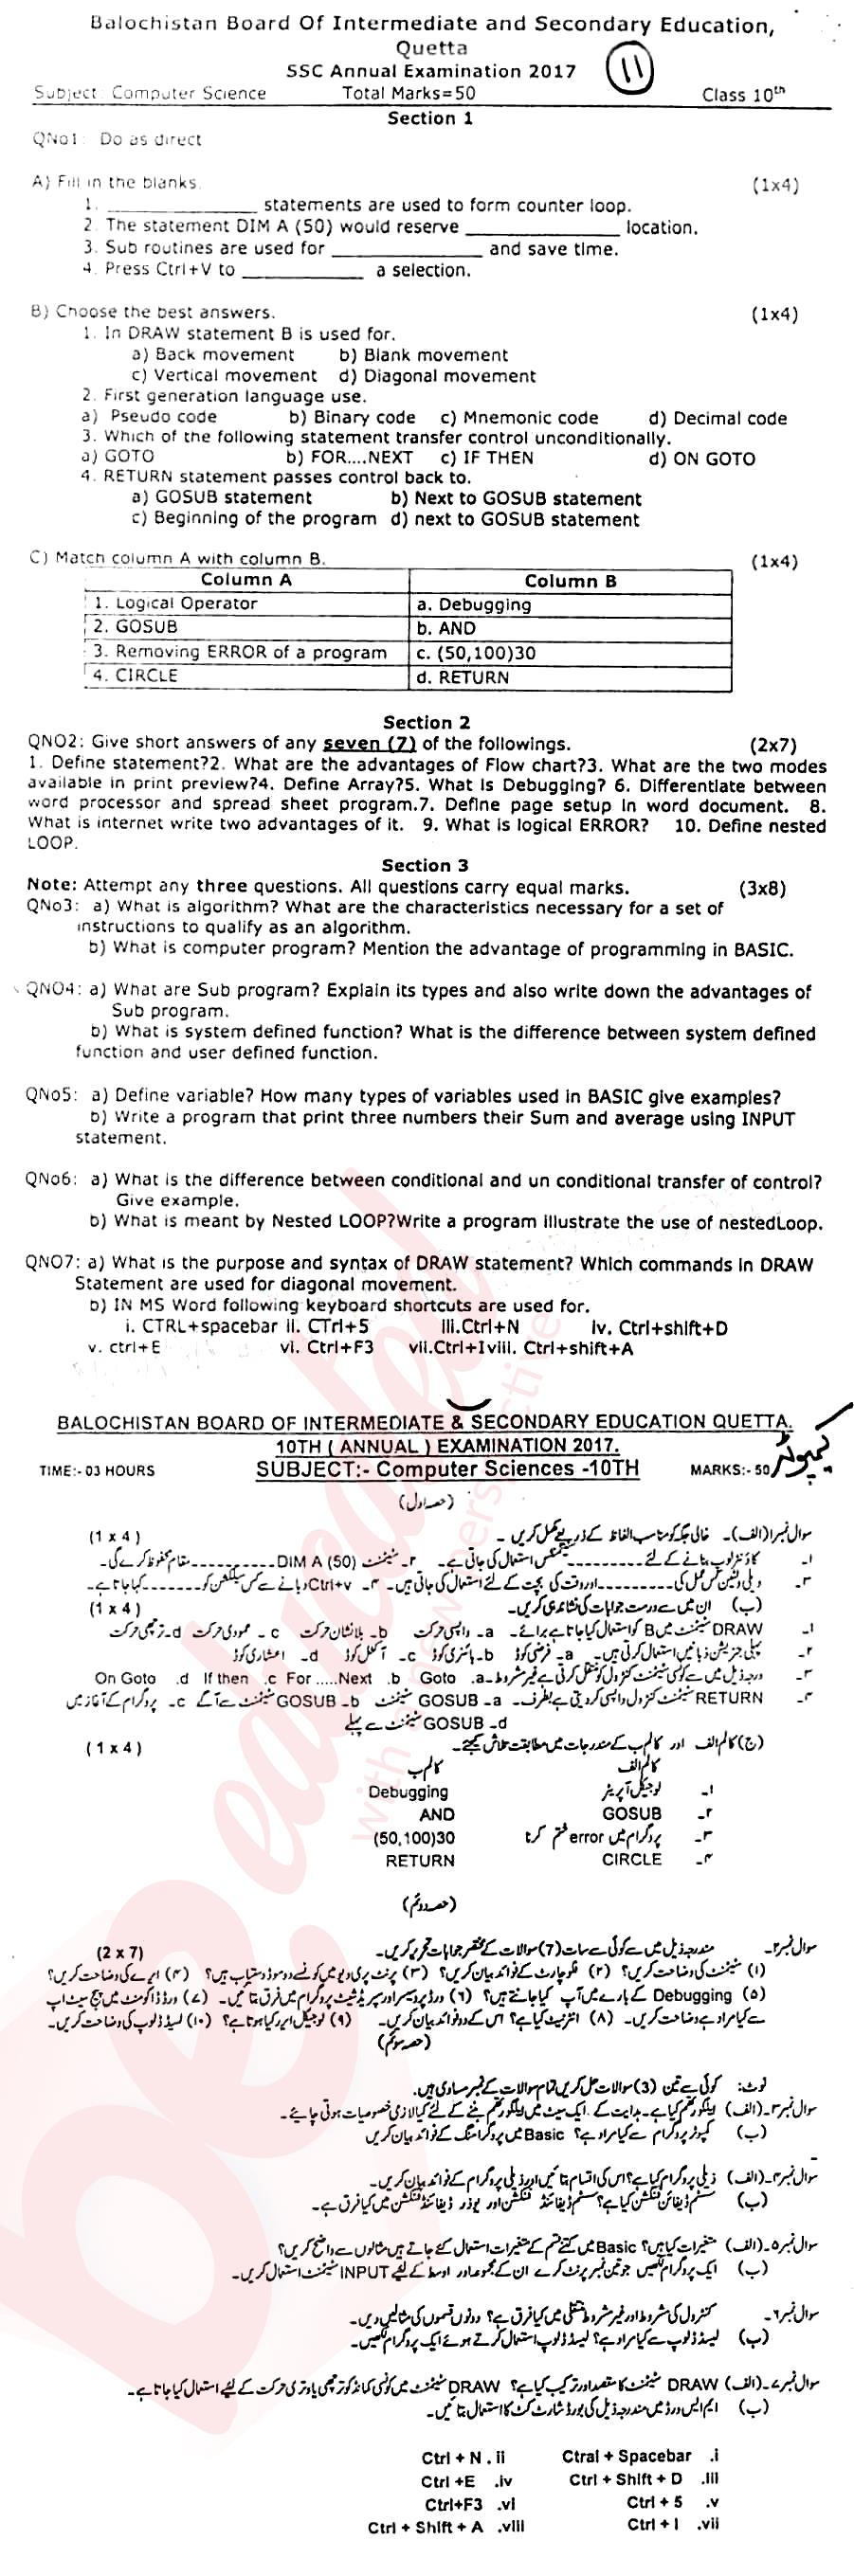 Computer Science 10th English Medium Past Paper Group 1 BISE Quetta 2017